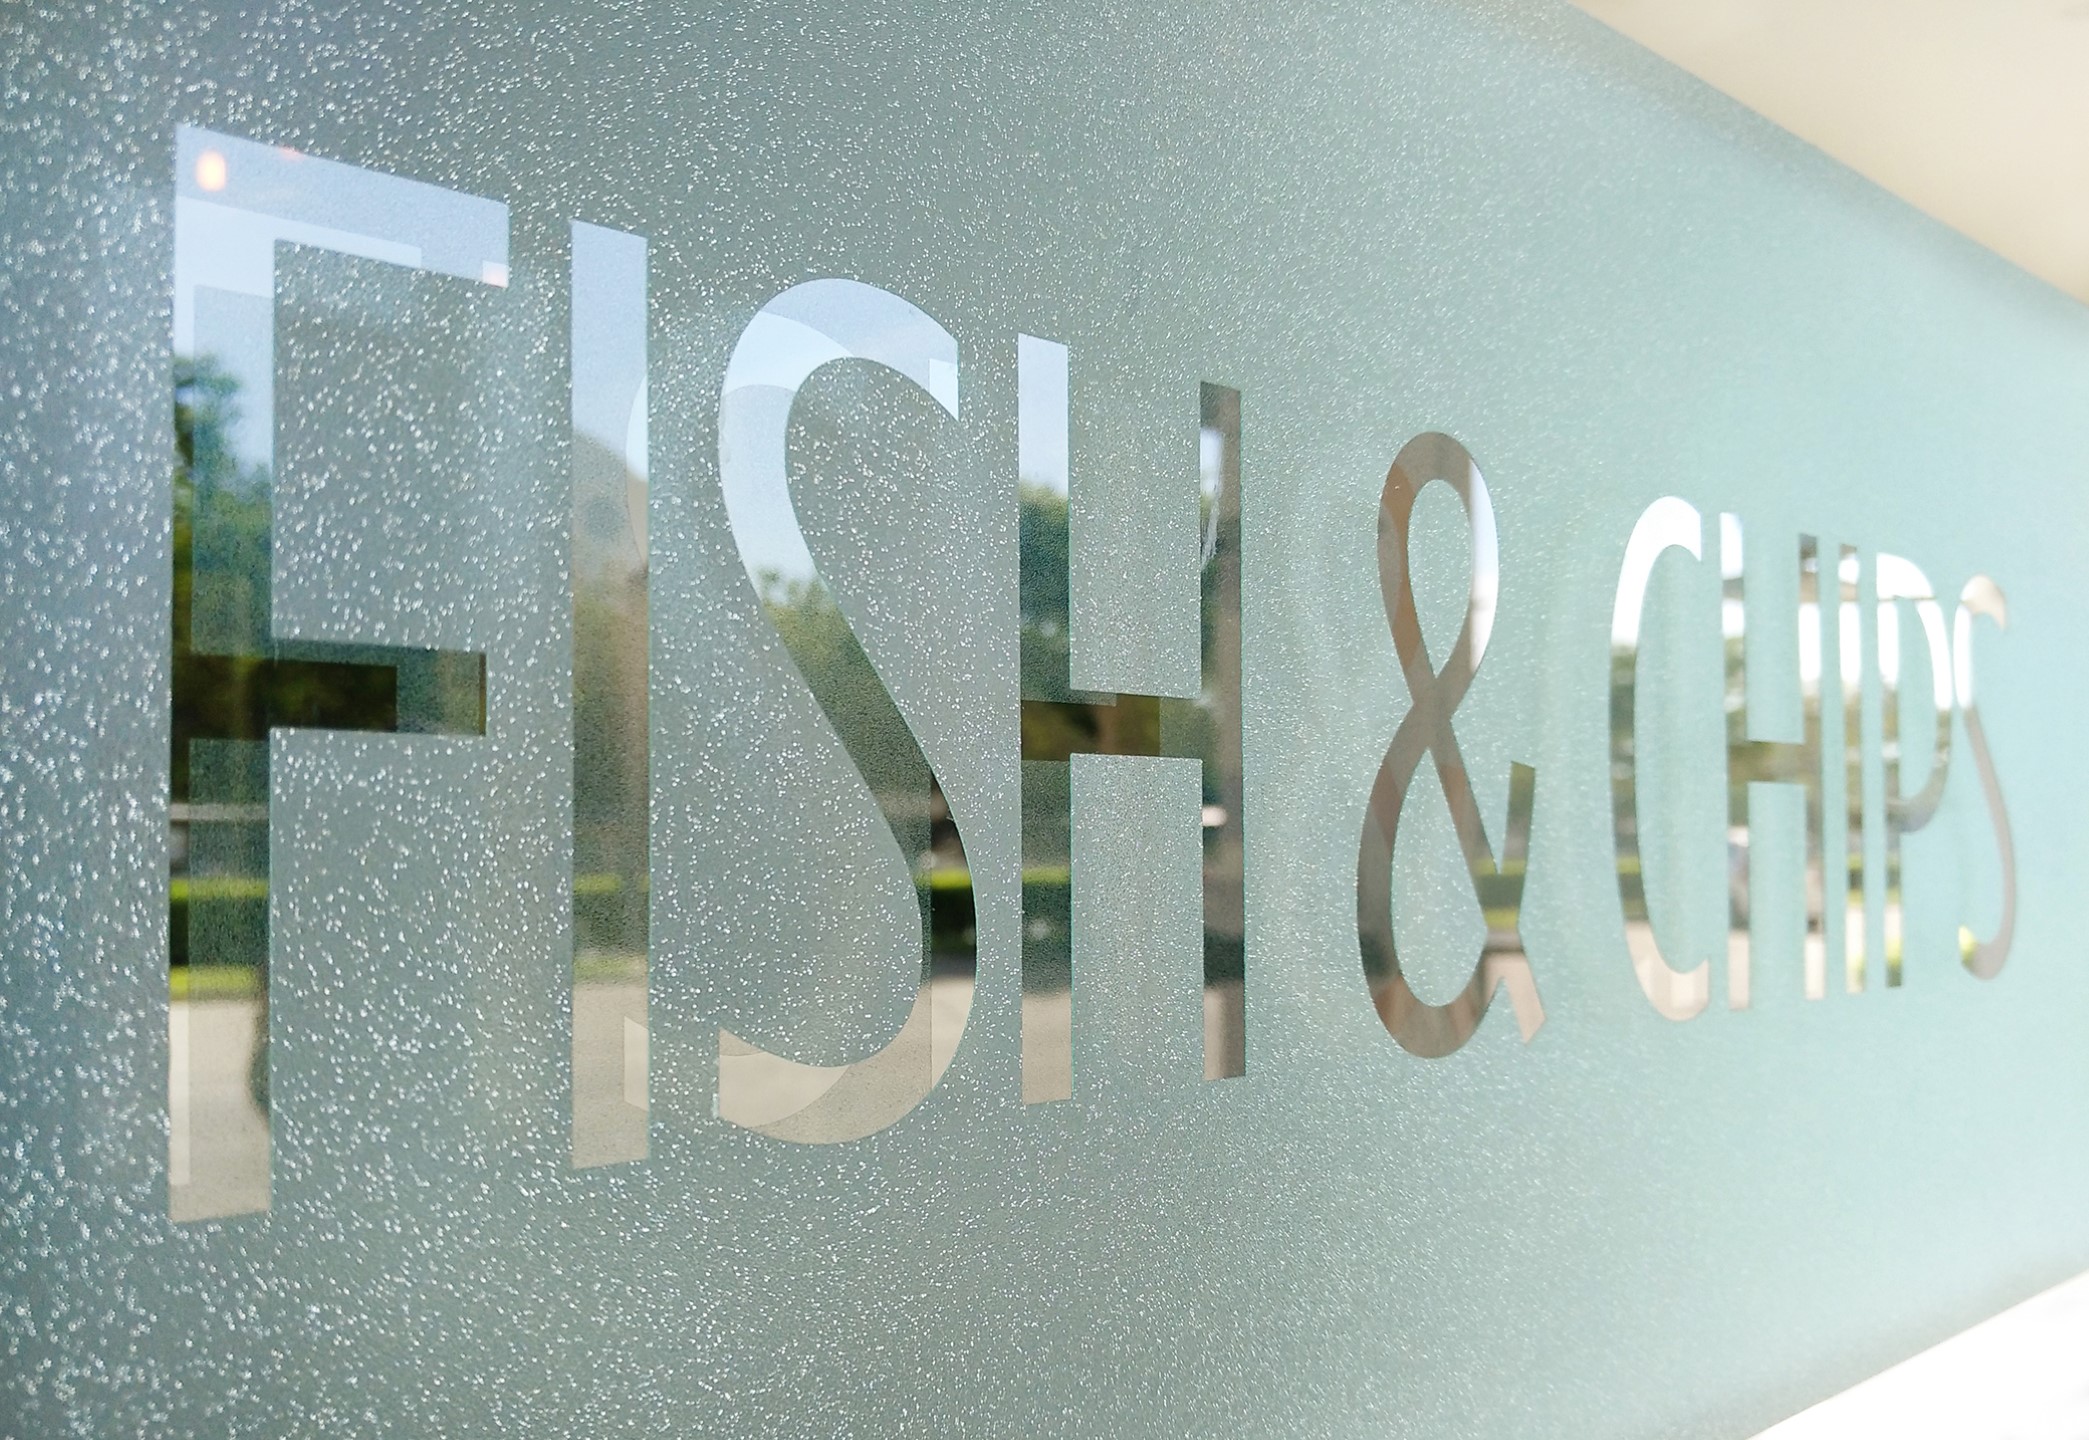 etched glass signage